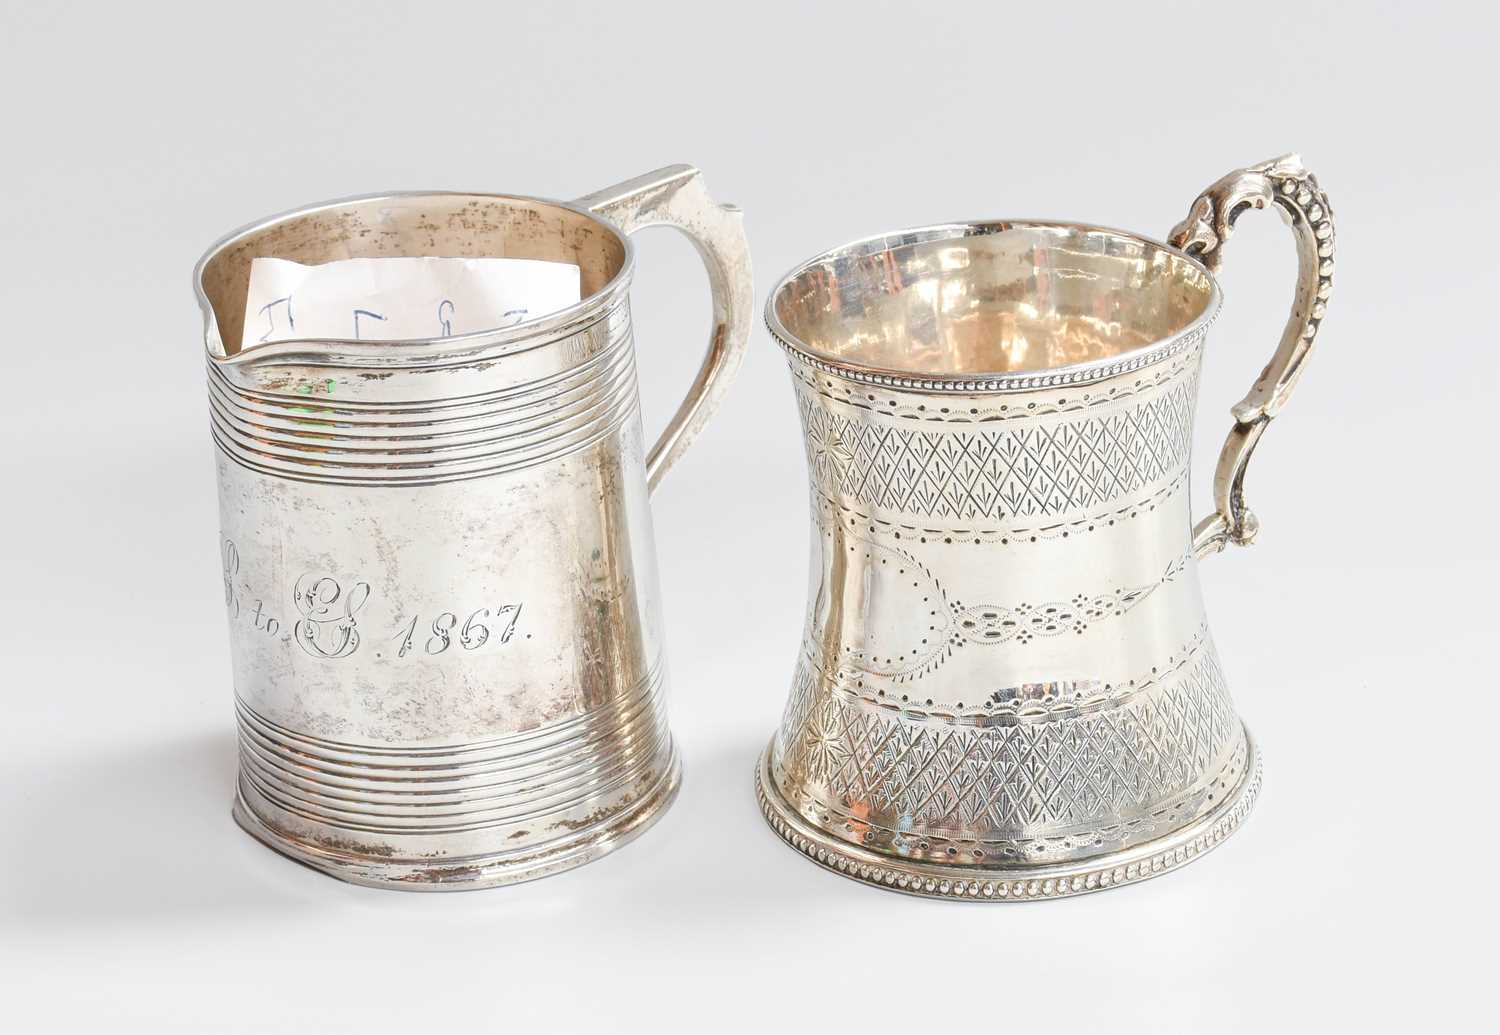 A Victorian Silver Christening-Mug, by Thomas Smily, London, 1866, centrally waisted and with beaded